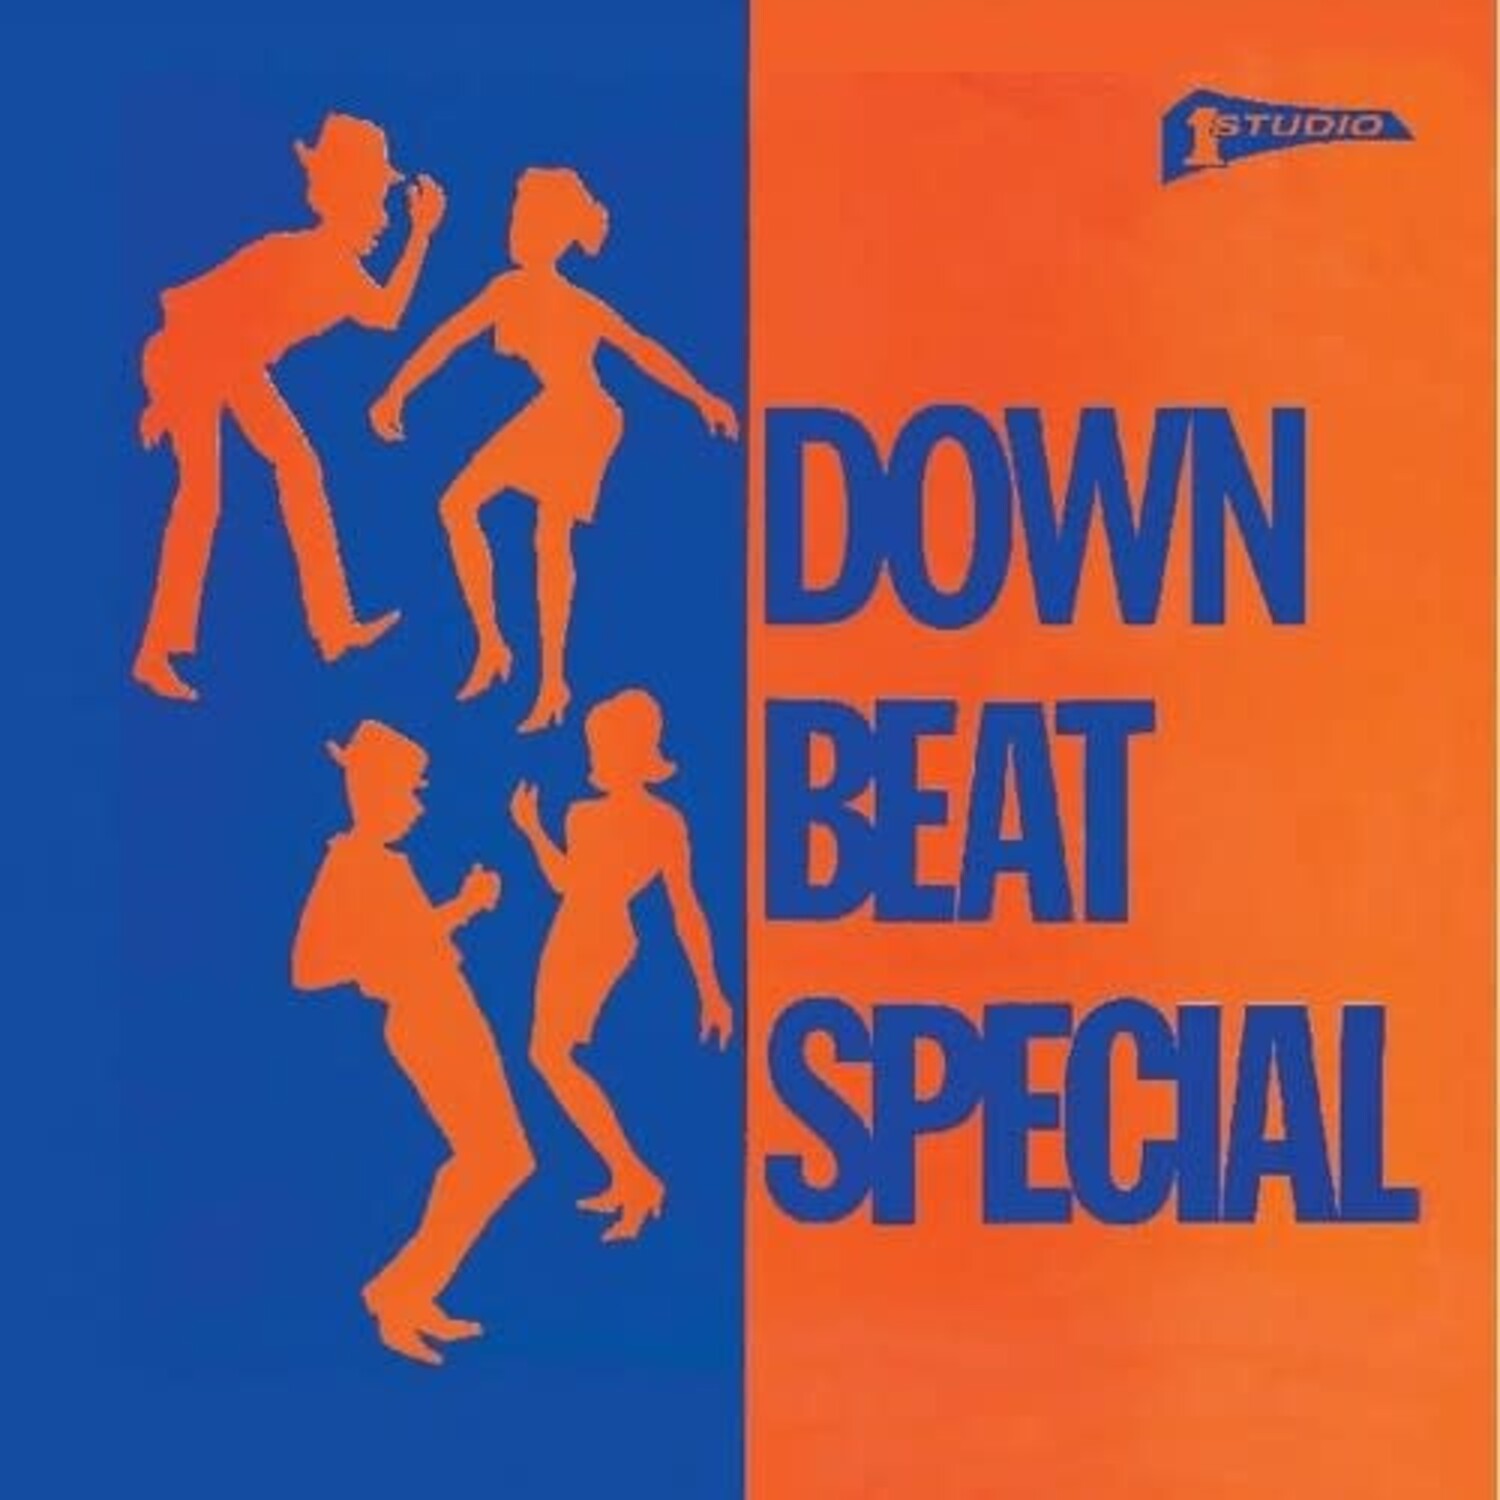 Soul Jazz Records - Studio One Down Beat Special LP - Wax Trax Records